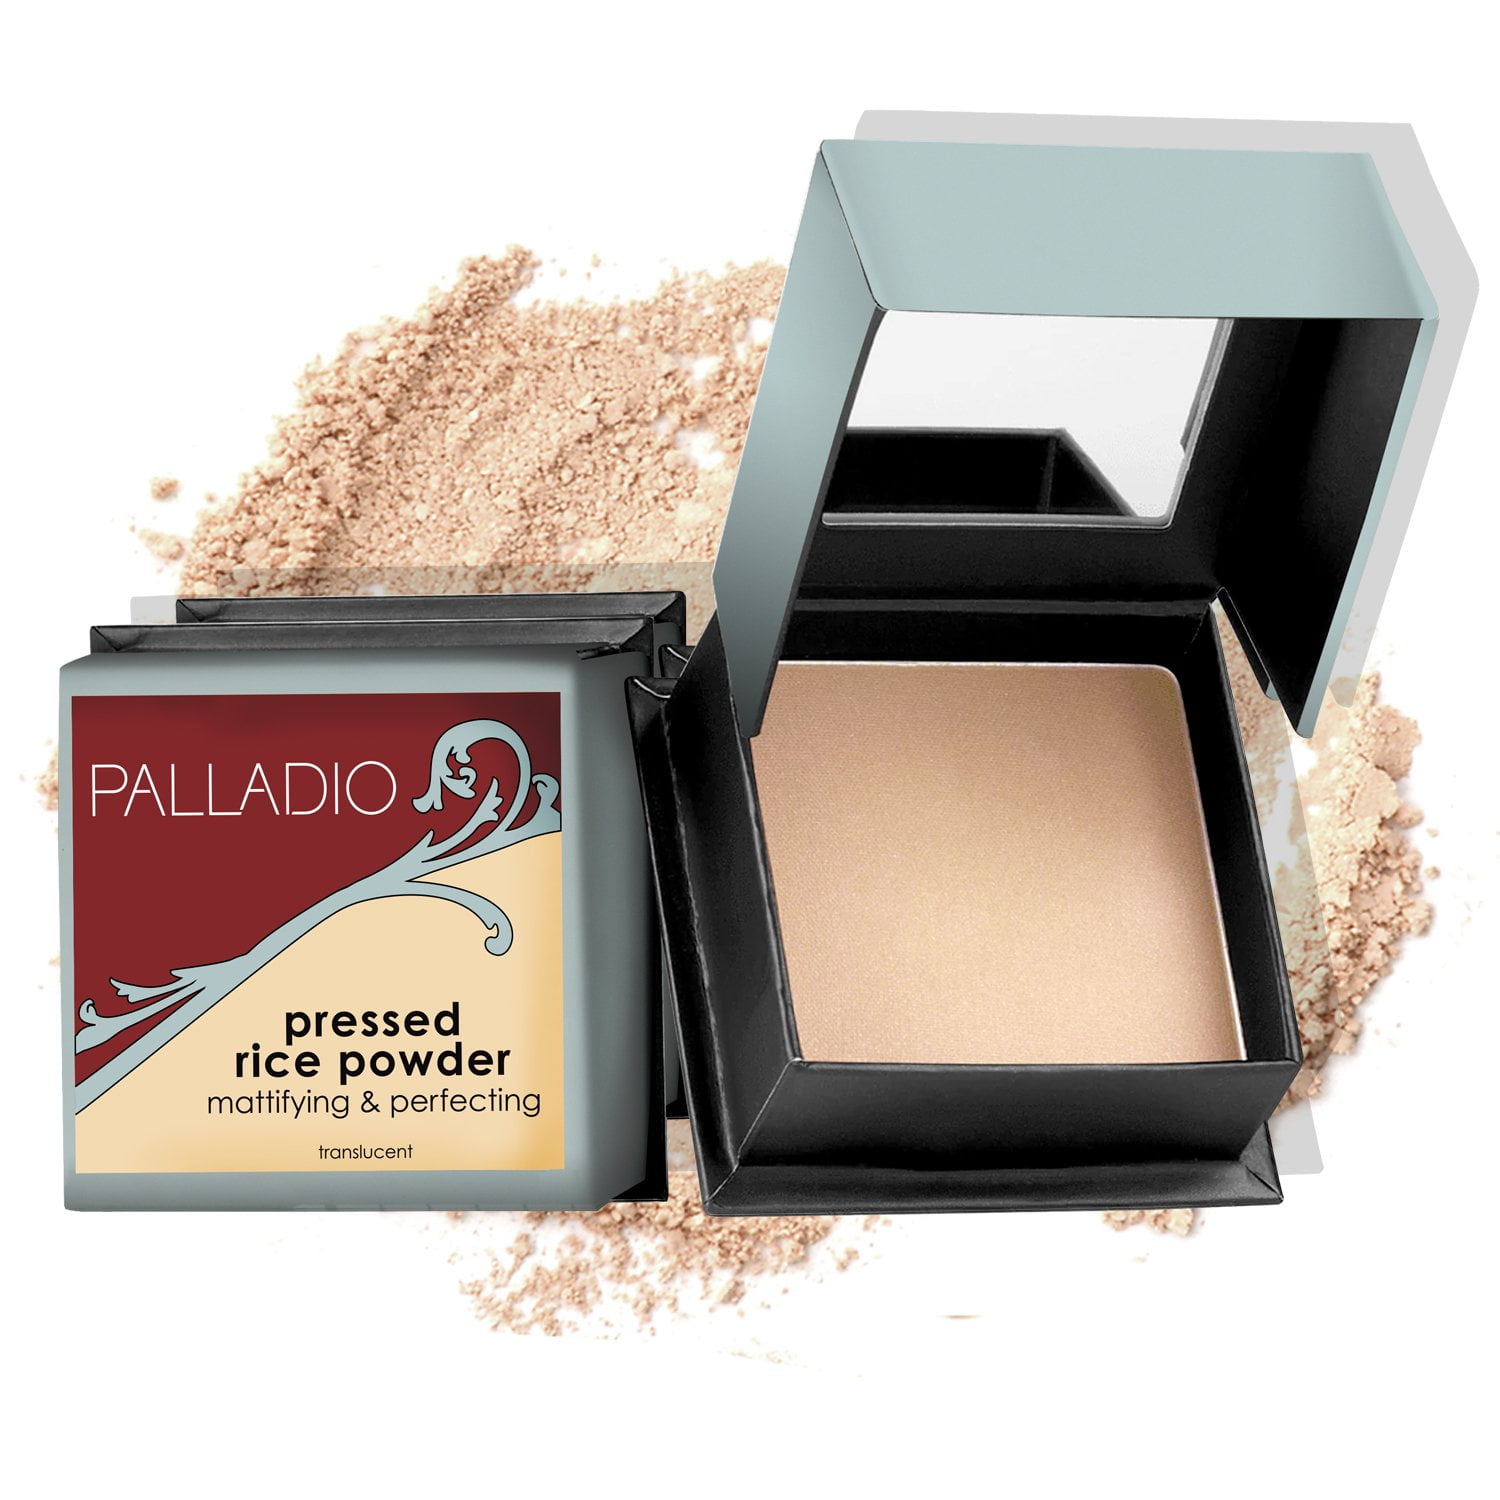 Palladio, Pressed Rice Powder with Mirror Mattifying Makeup Setting that  Lasts All Day Instantly Absorbs Oil Works alone or with makeup, Natural,   Ounce